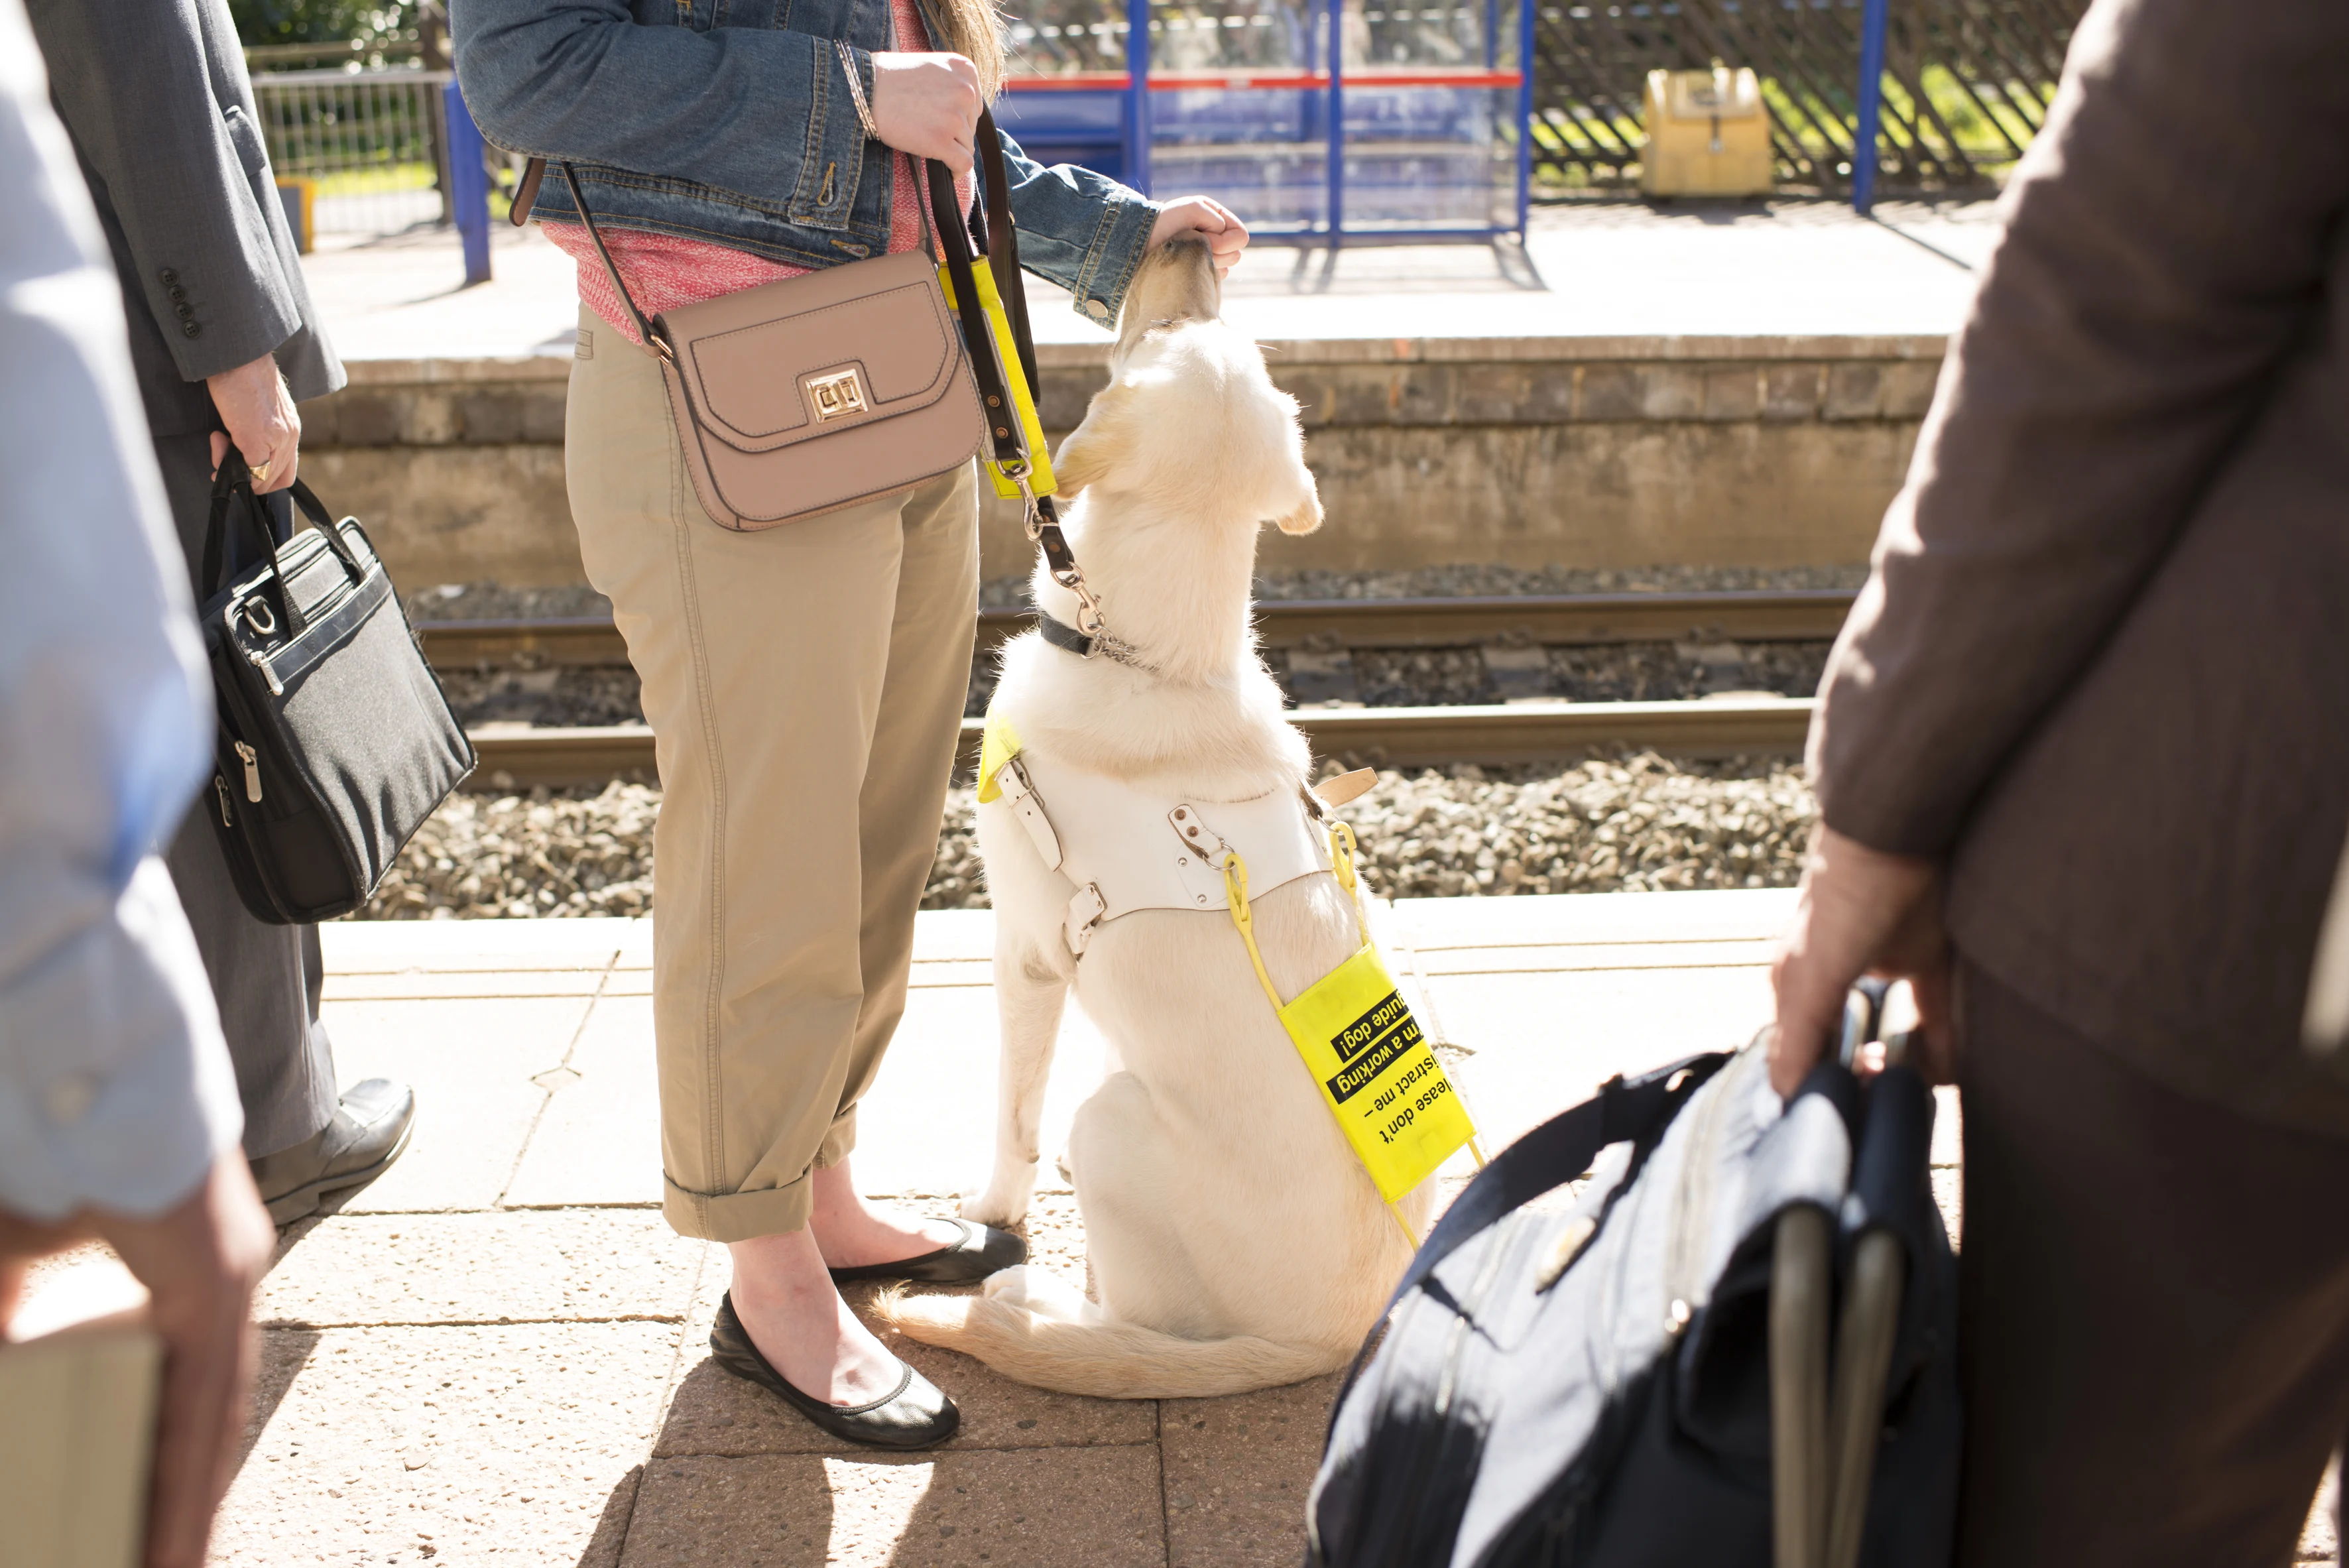 A woman standing on a station platform with an assistance dog (guide dog) wearing a harness and sign.